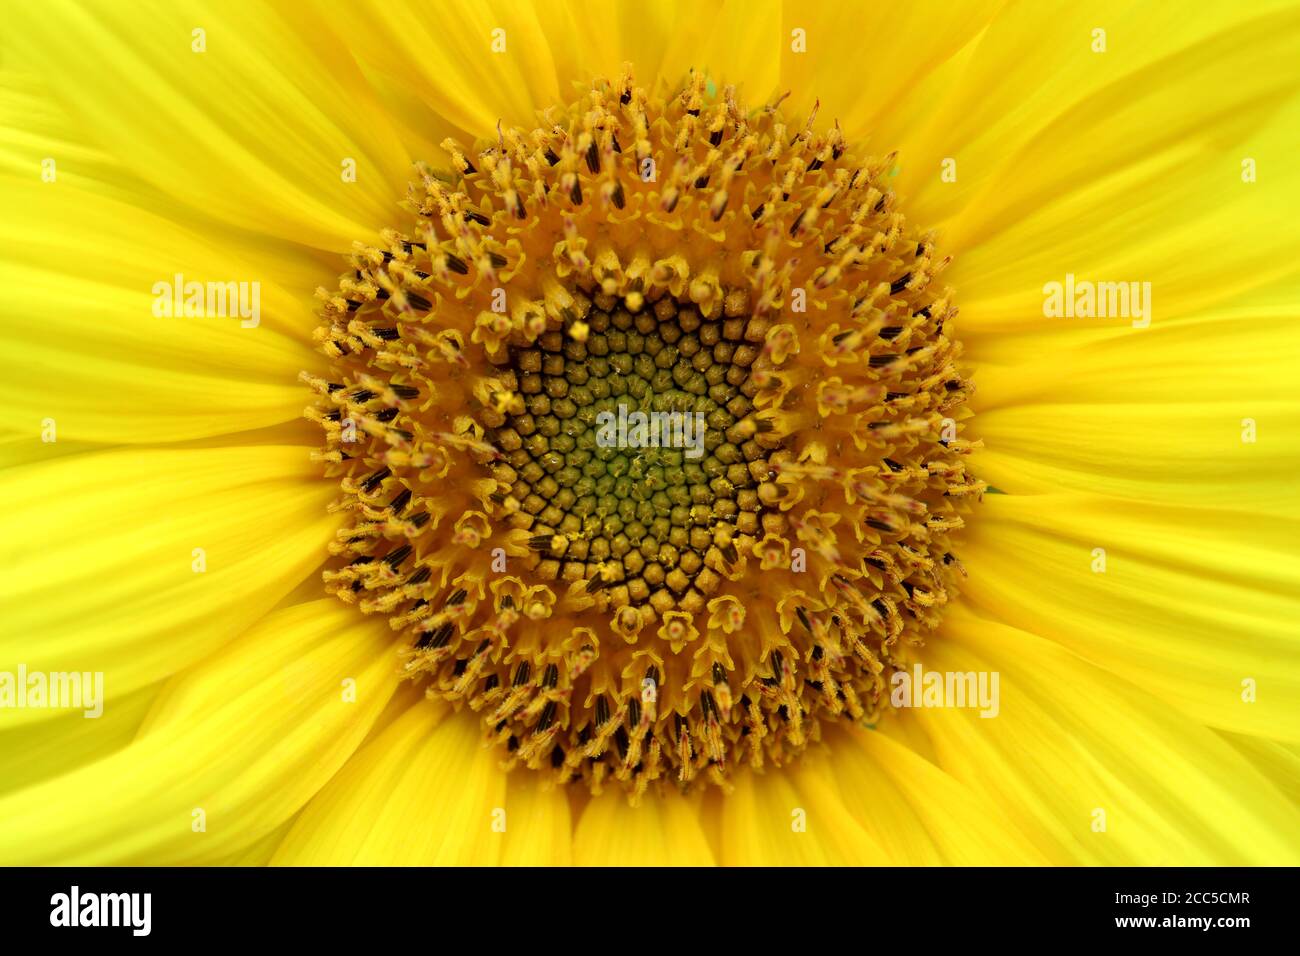 Yellow sunflower stamens macro,sunflower head,sunflower with delicate petals and stamens,summer flower,floral photo,beauty in nature,macro photography Stock Photo